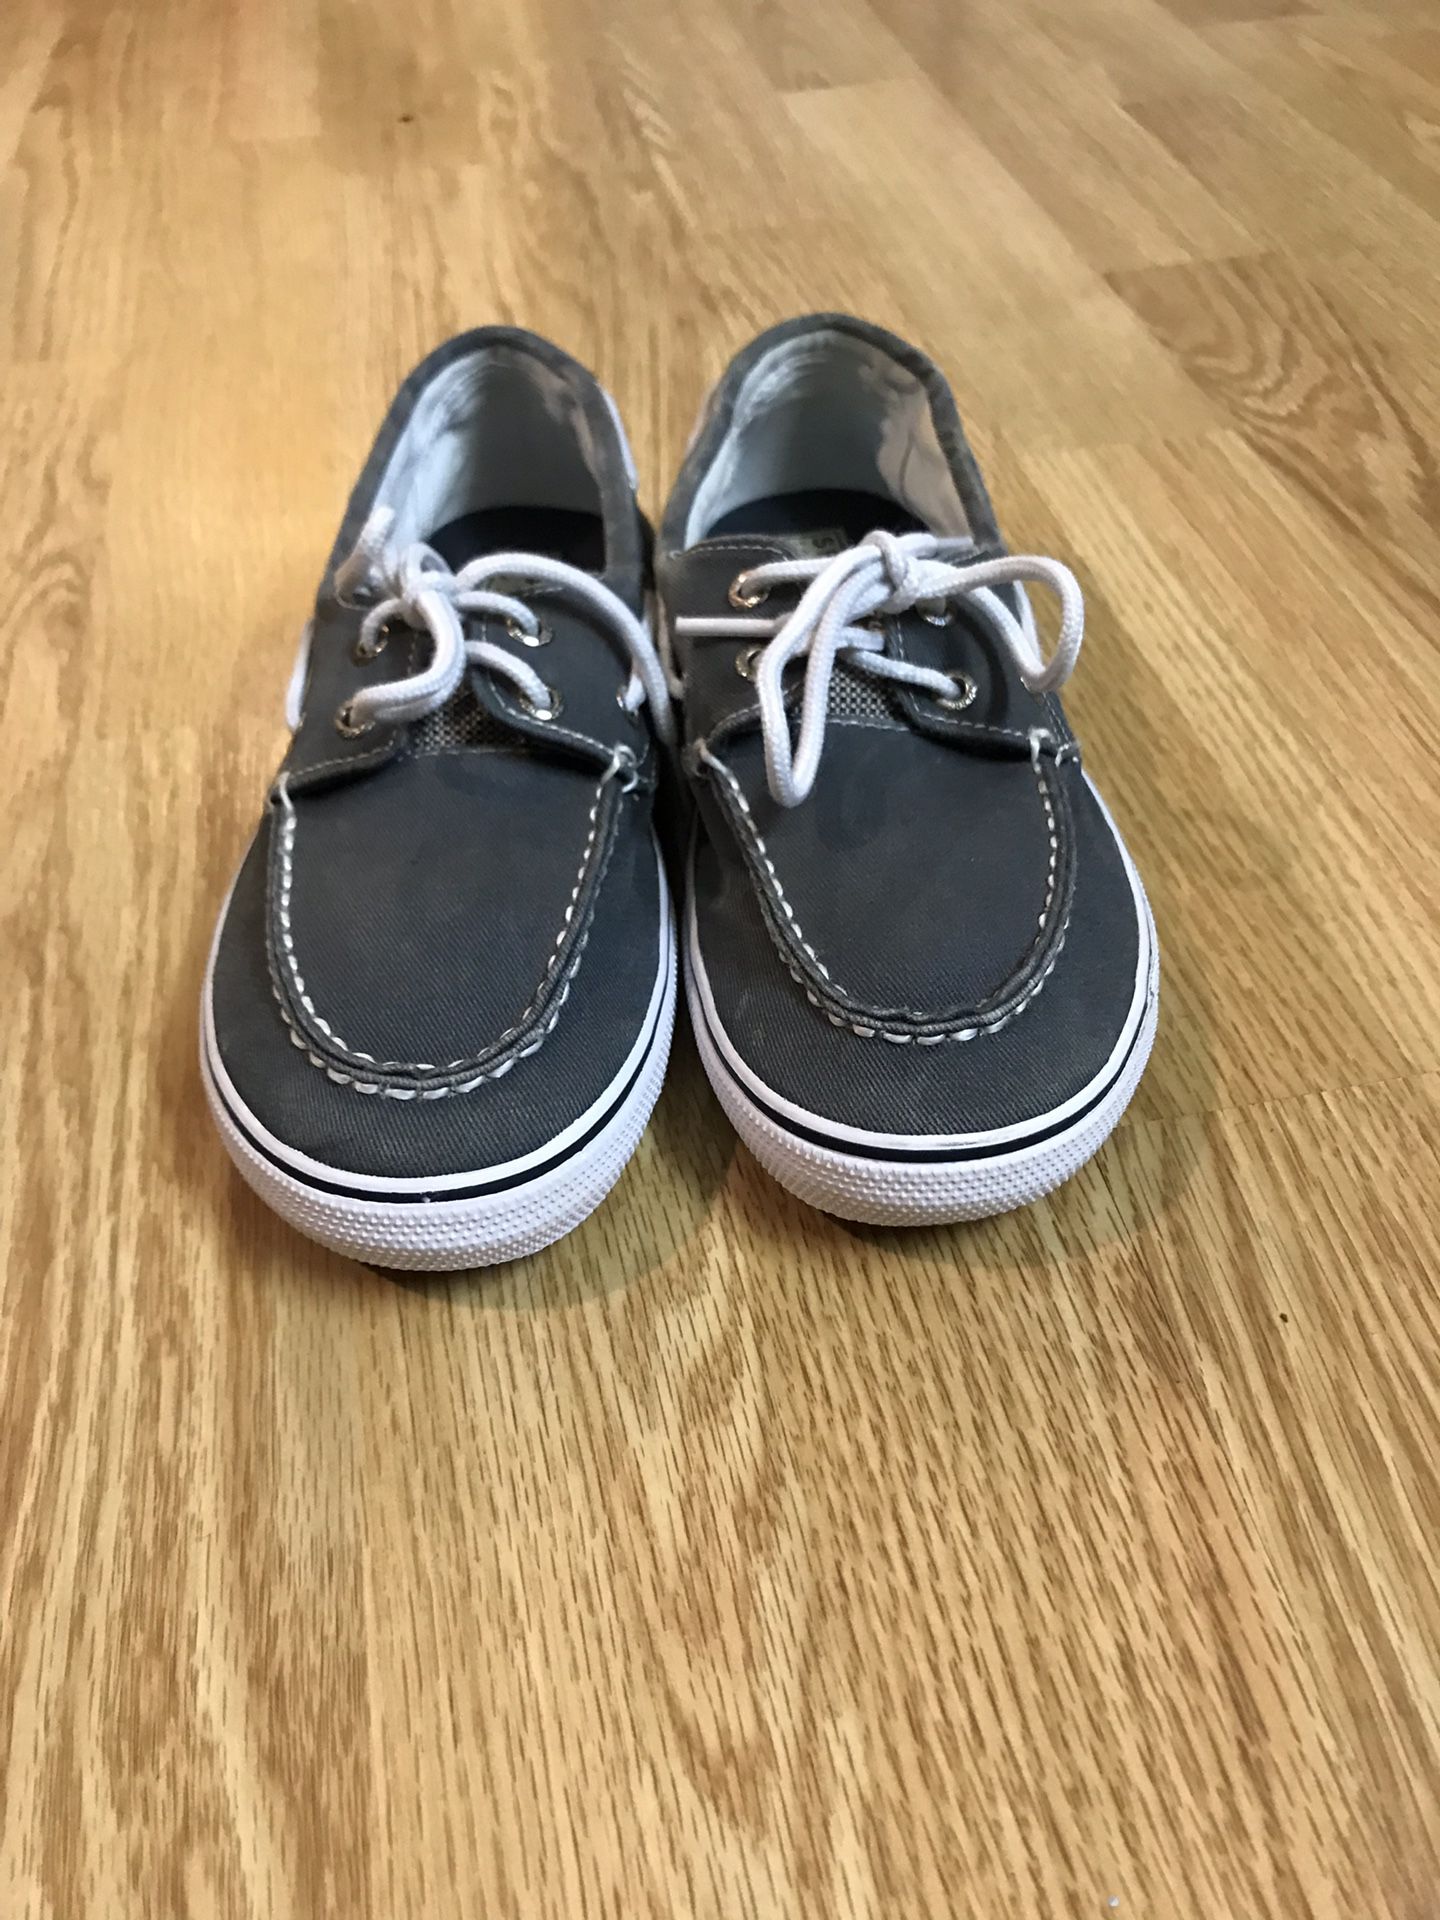 sperry Top-sider Halyard Shoes For Boys